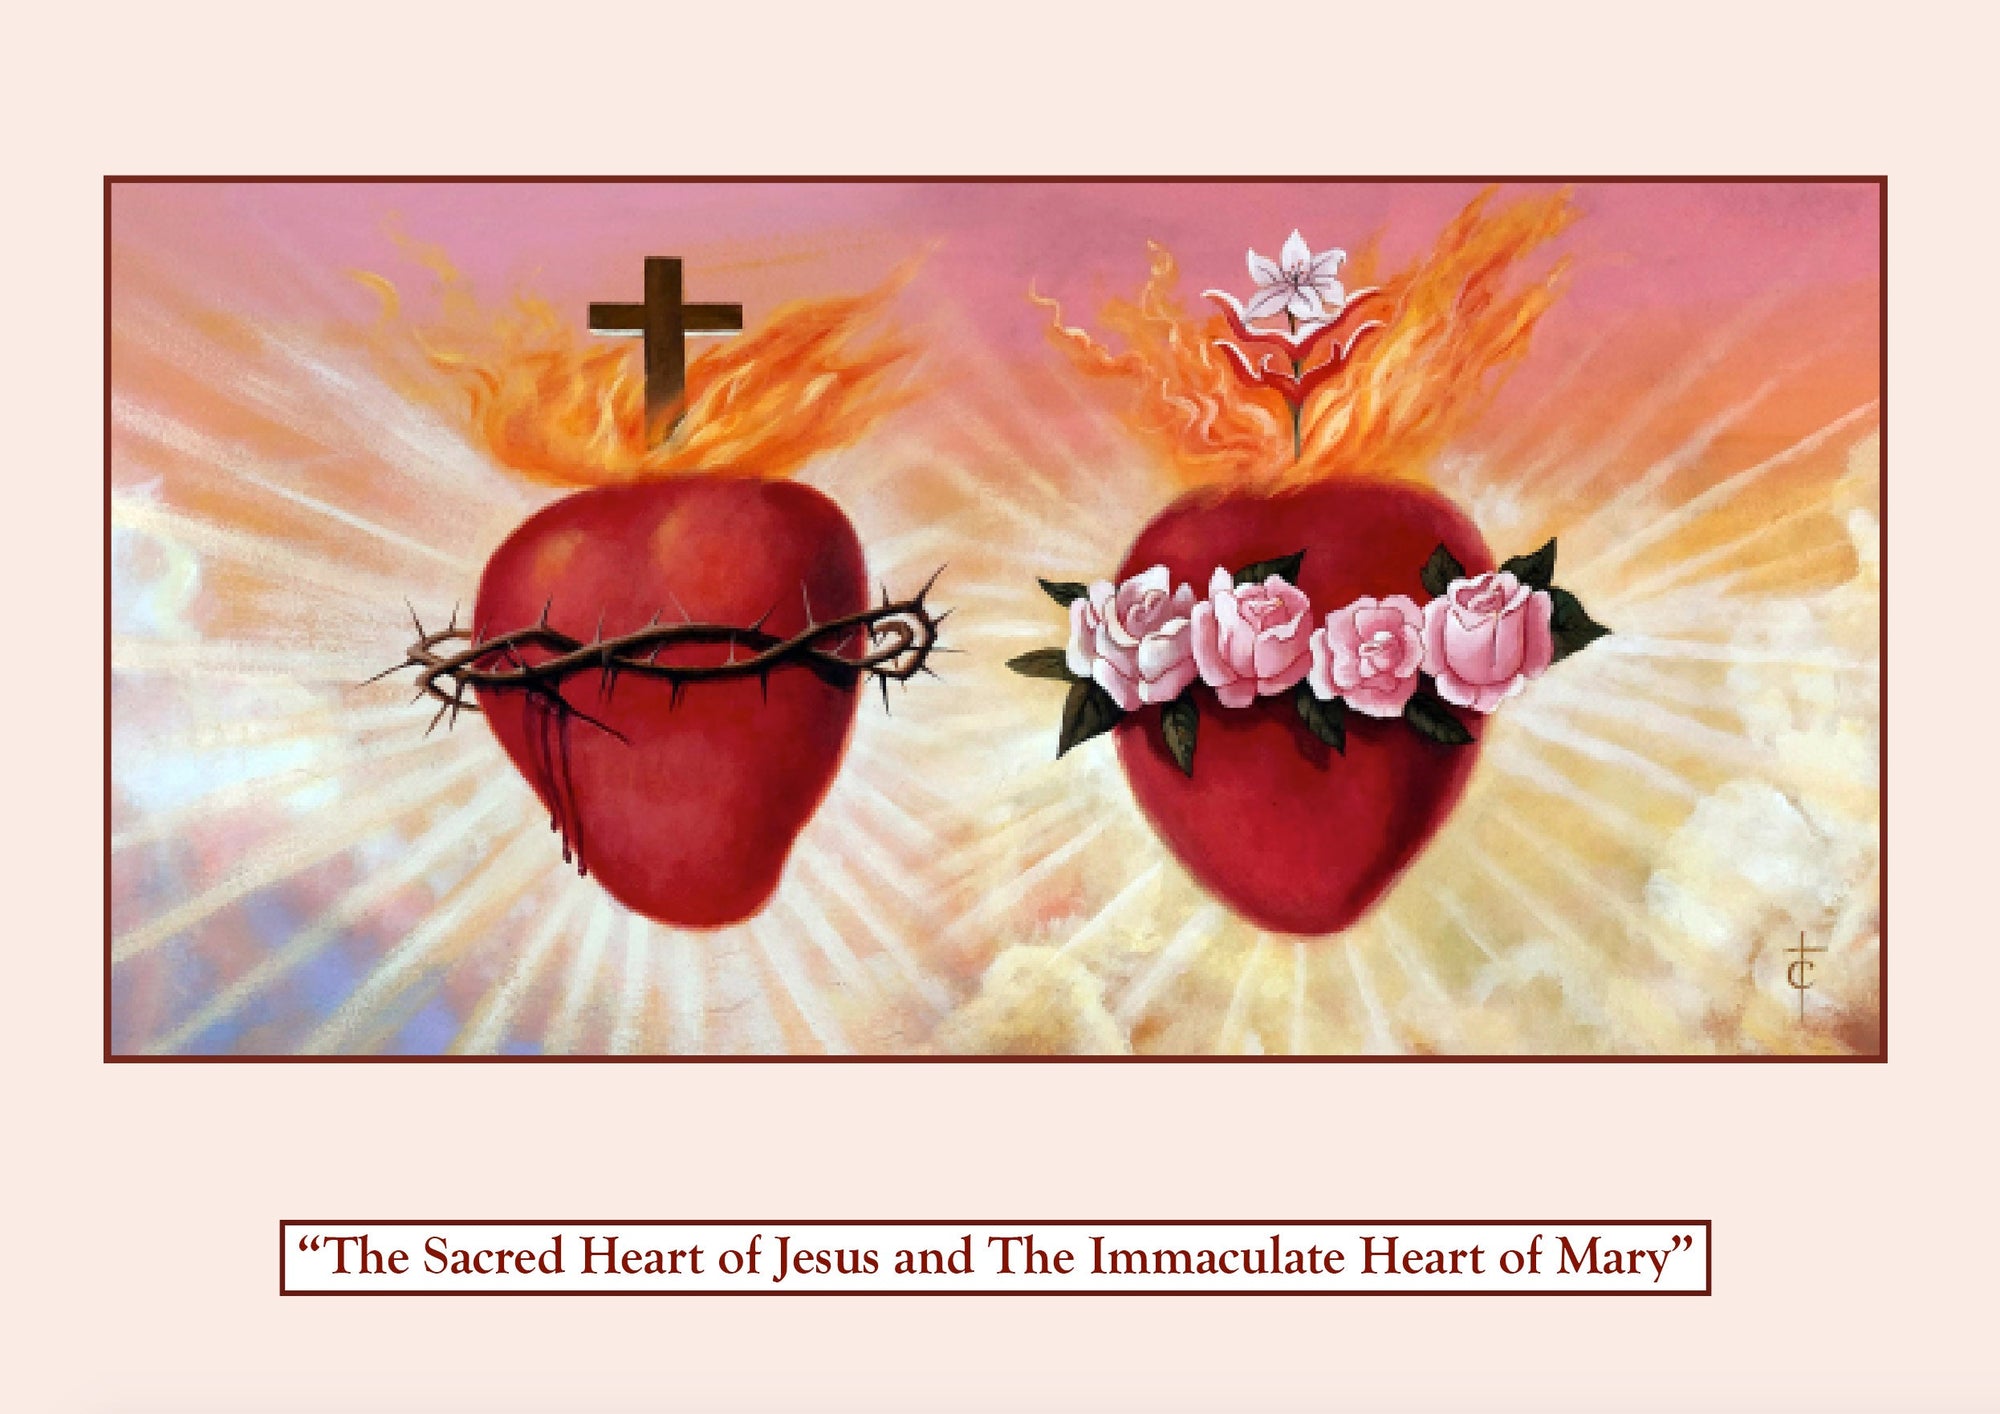 The Sacred Heart of Jesus and The Immaculate Heart of Mary